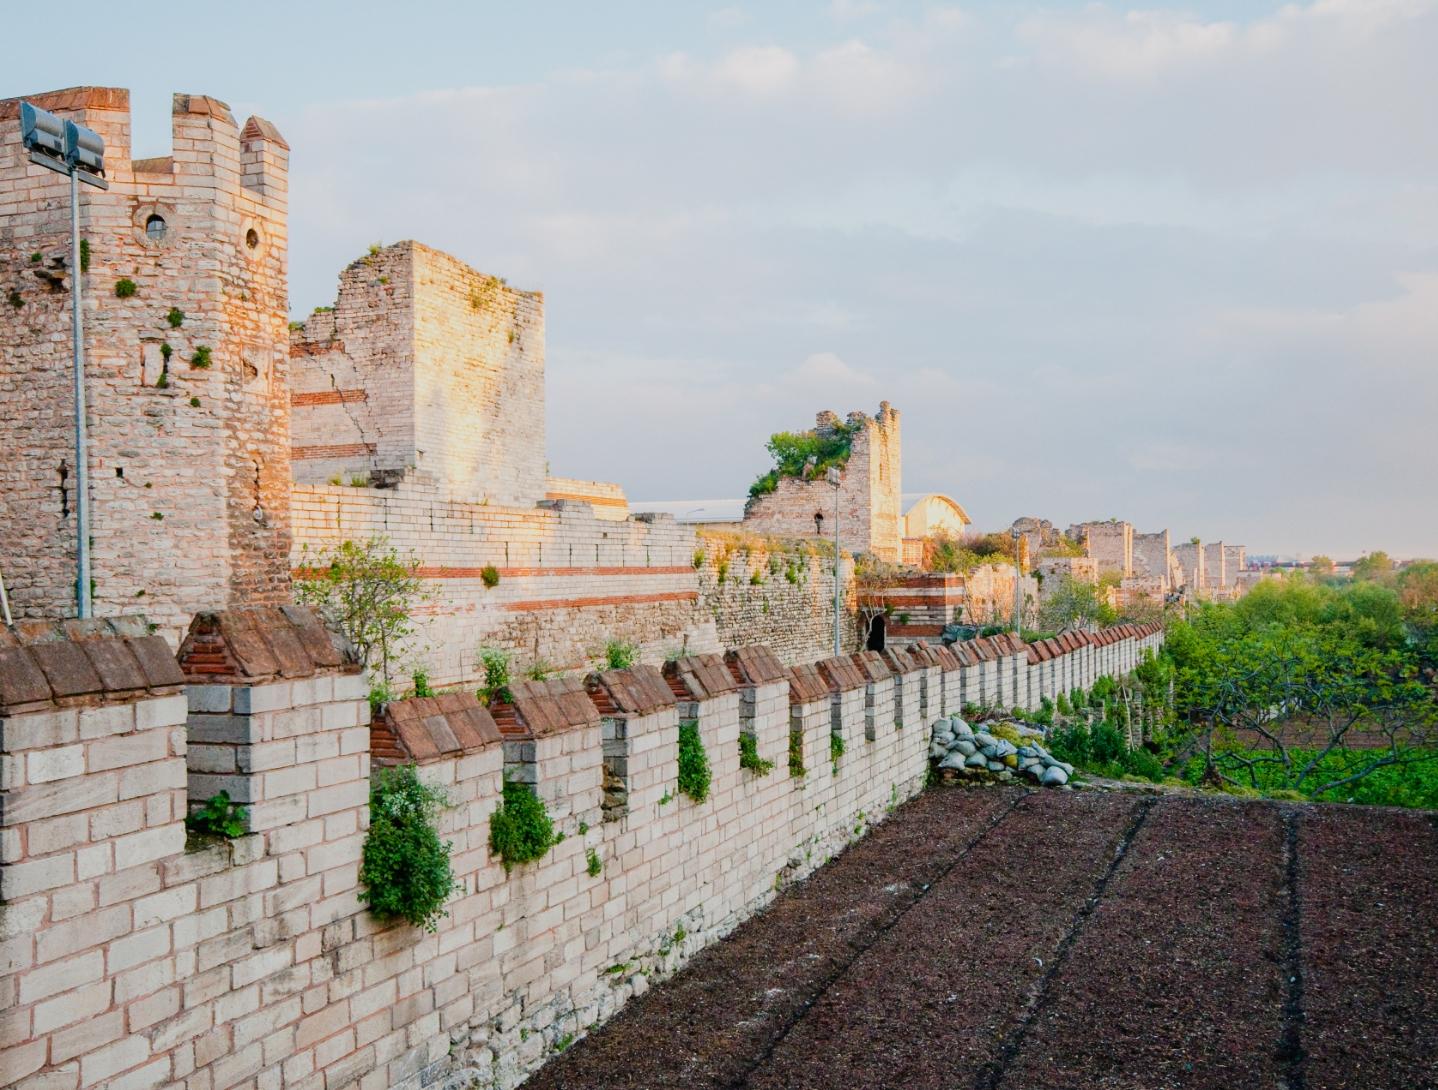 The Walls of Constantinople